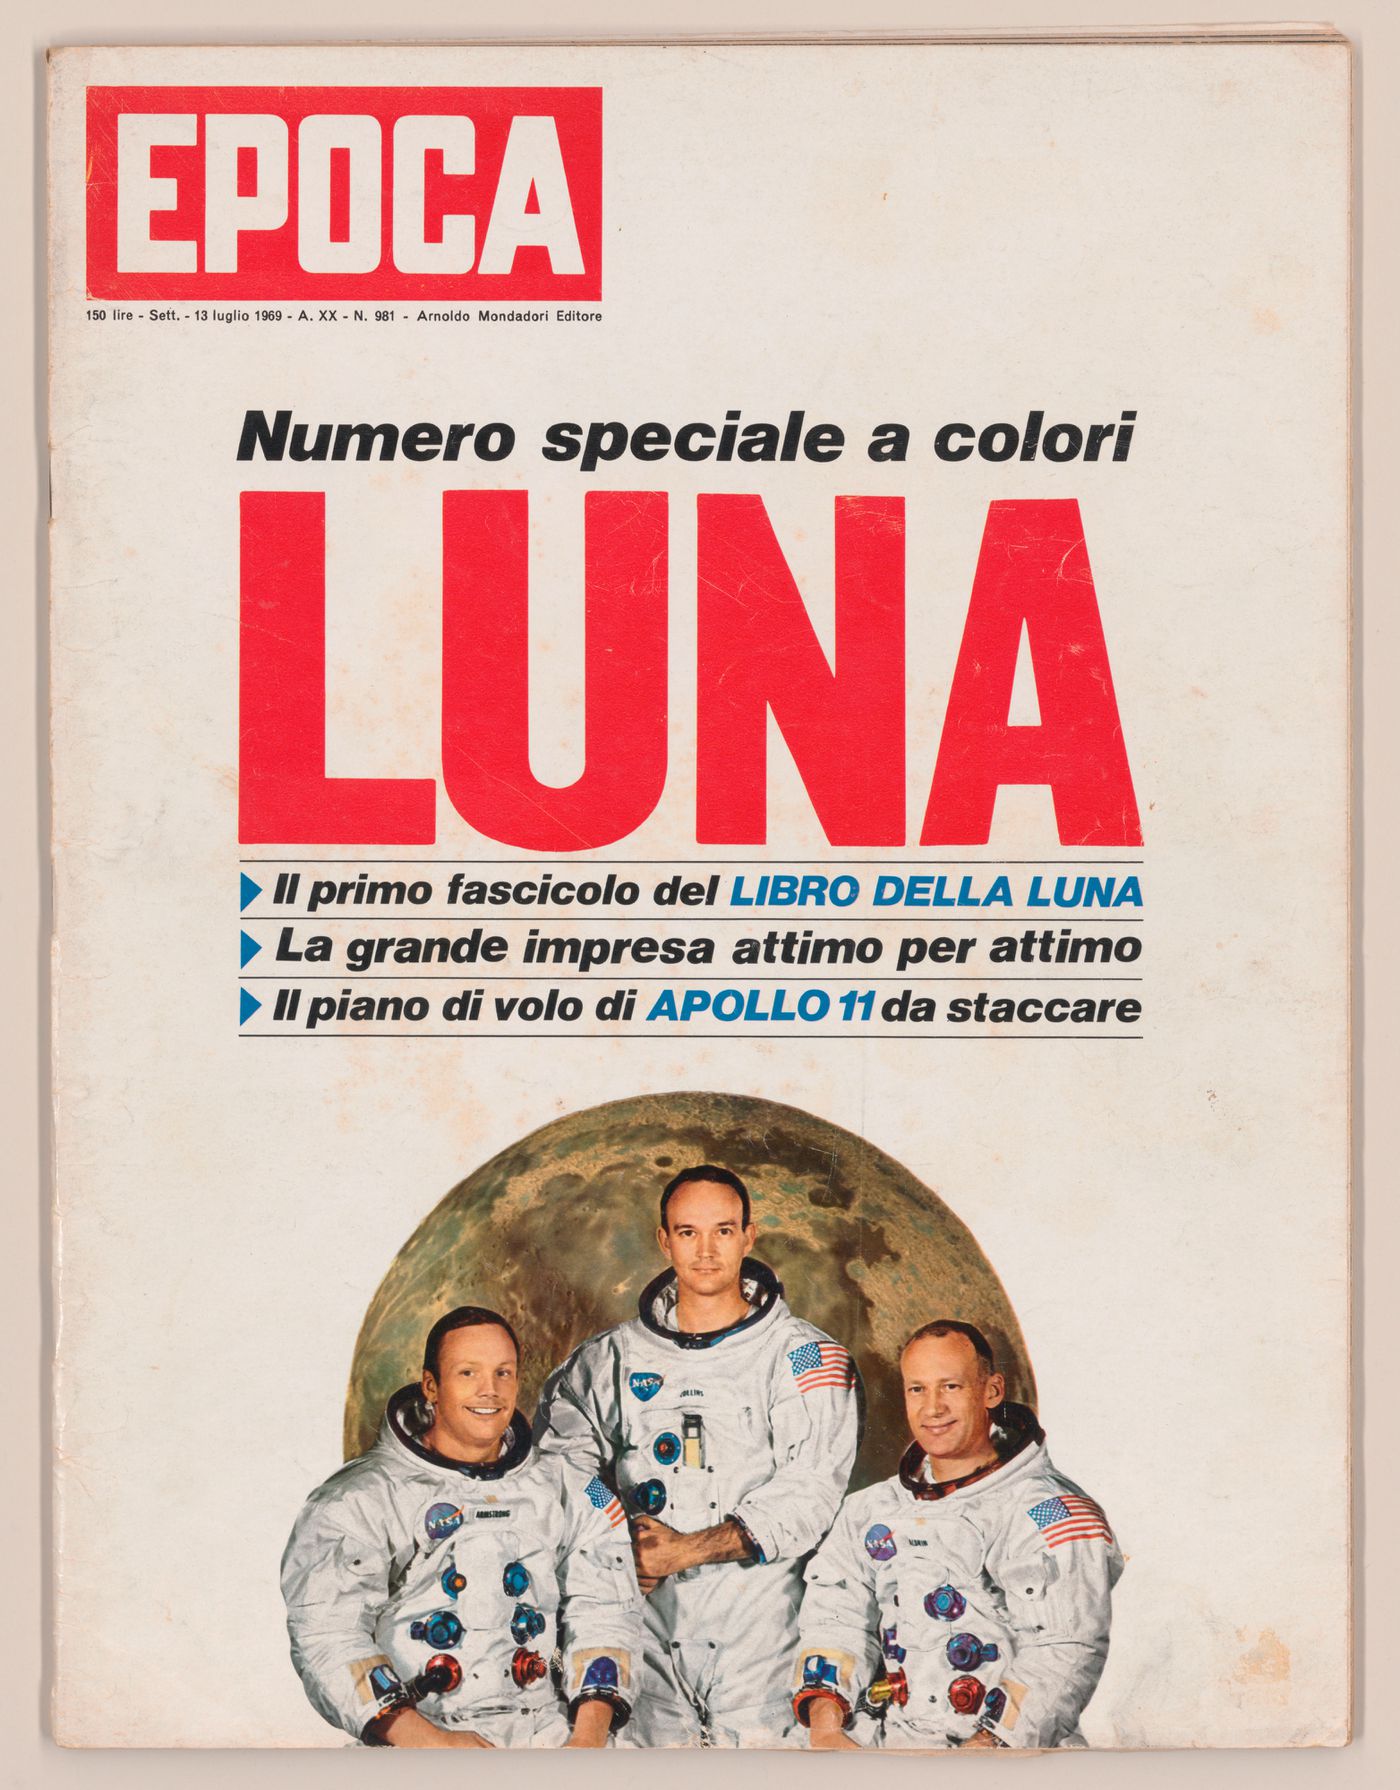 Issue of "Epoca" magazine, special number "LUNA" (n.981) (from the project file Architettura Interplanetaria [Interplanetary Architecture])